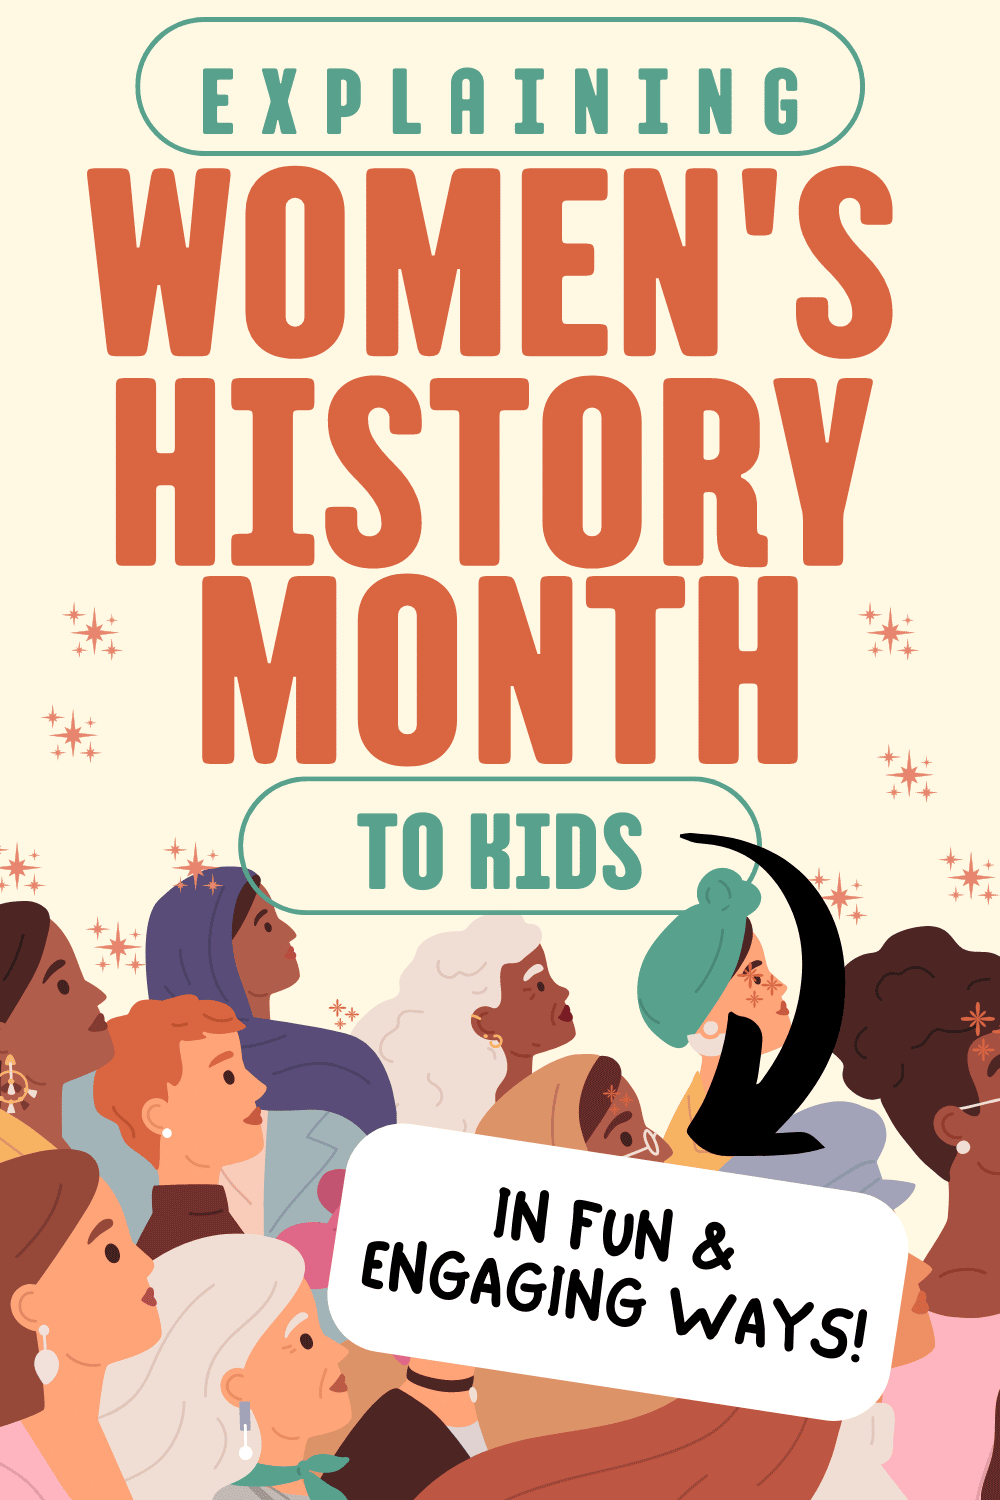 Why do we celebrate womens history month for kids (about history women month) - text with cartoon image of diverse women